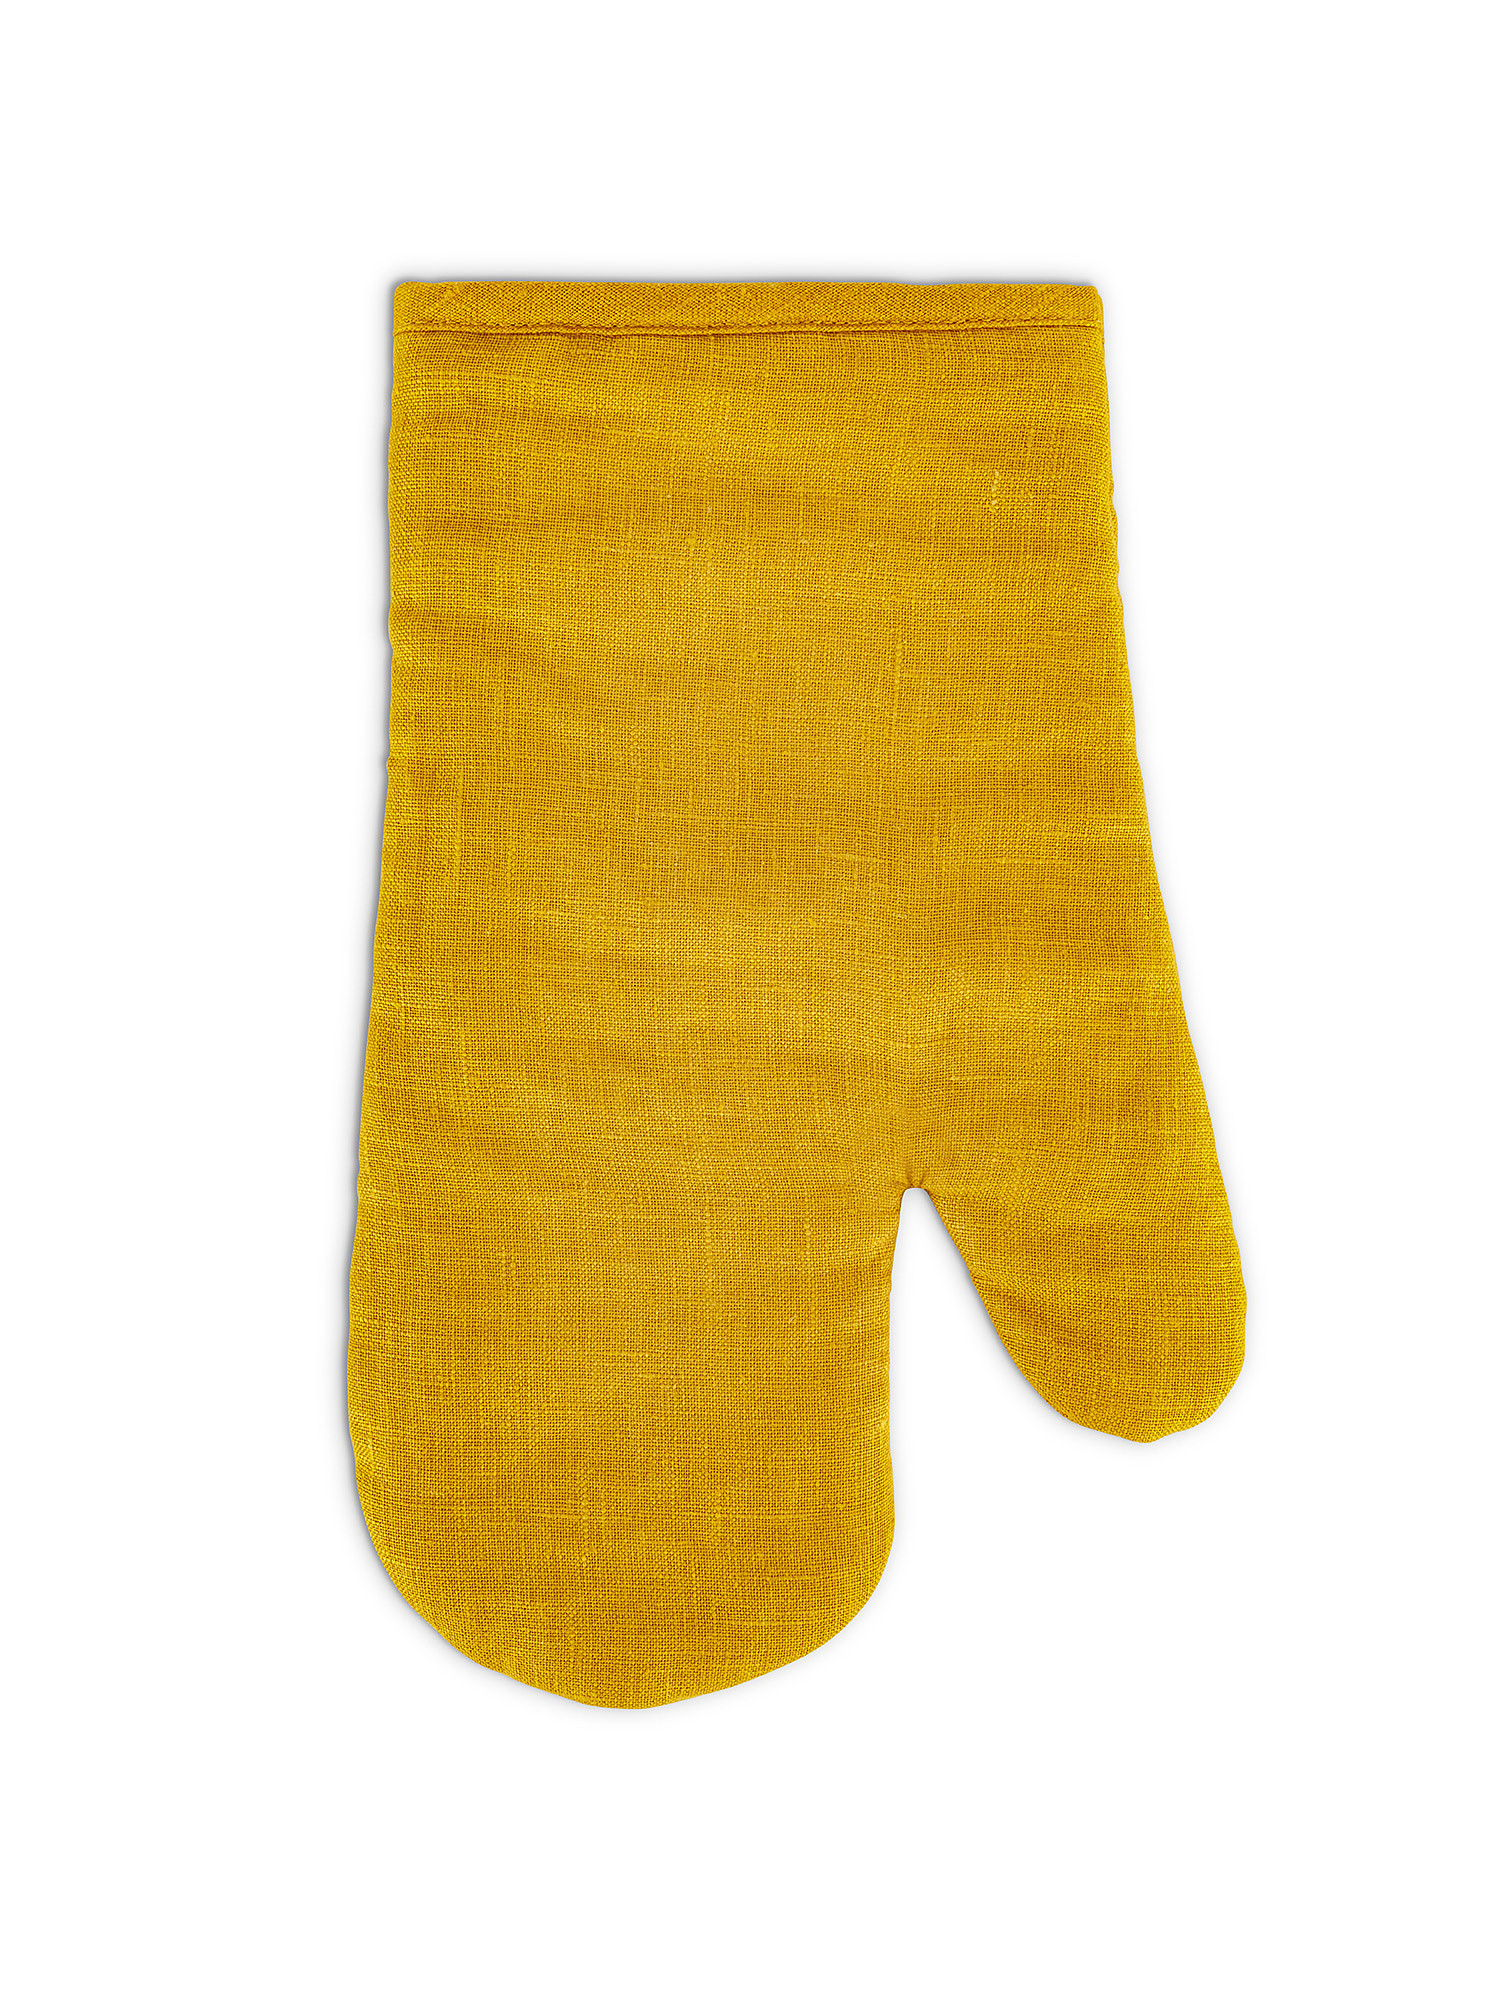 Solid color washed linen kitchen glove, Ocra Yellow, large image number 0